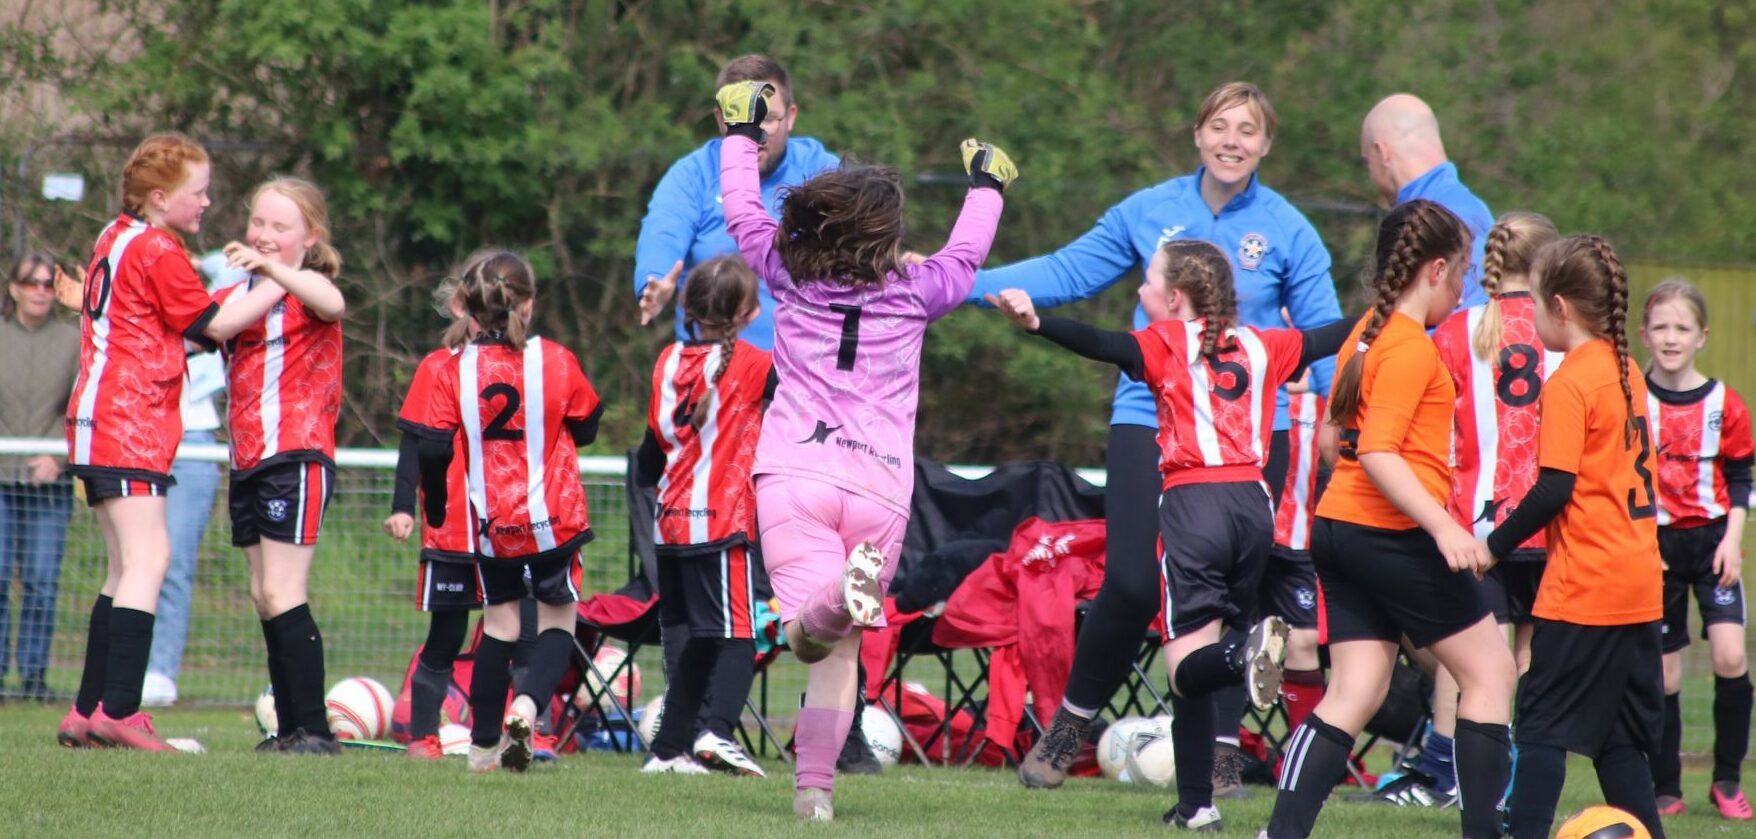 Move Over Wrexham AFC, The Real Champions Are Here: Newport Jaguars Win the Girls Under 8 Charity Cup Final